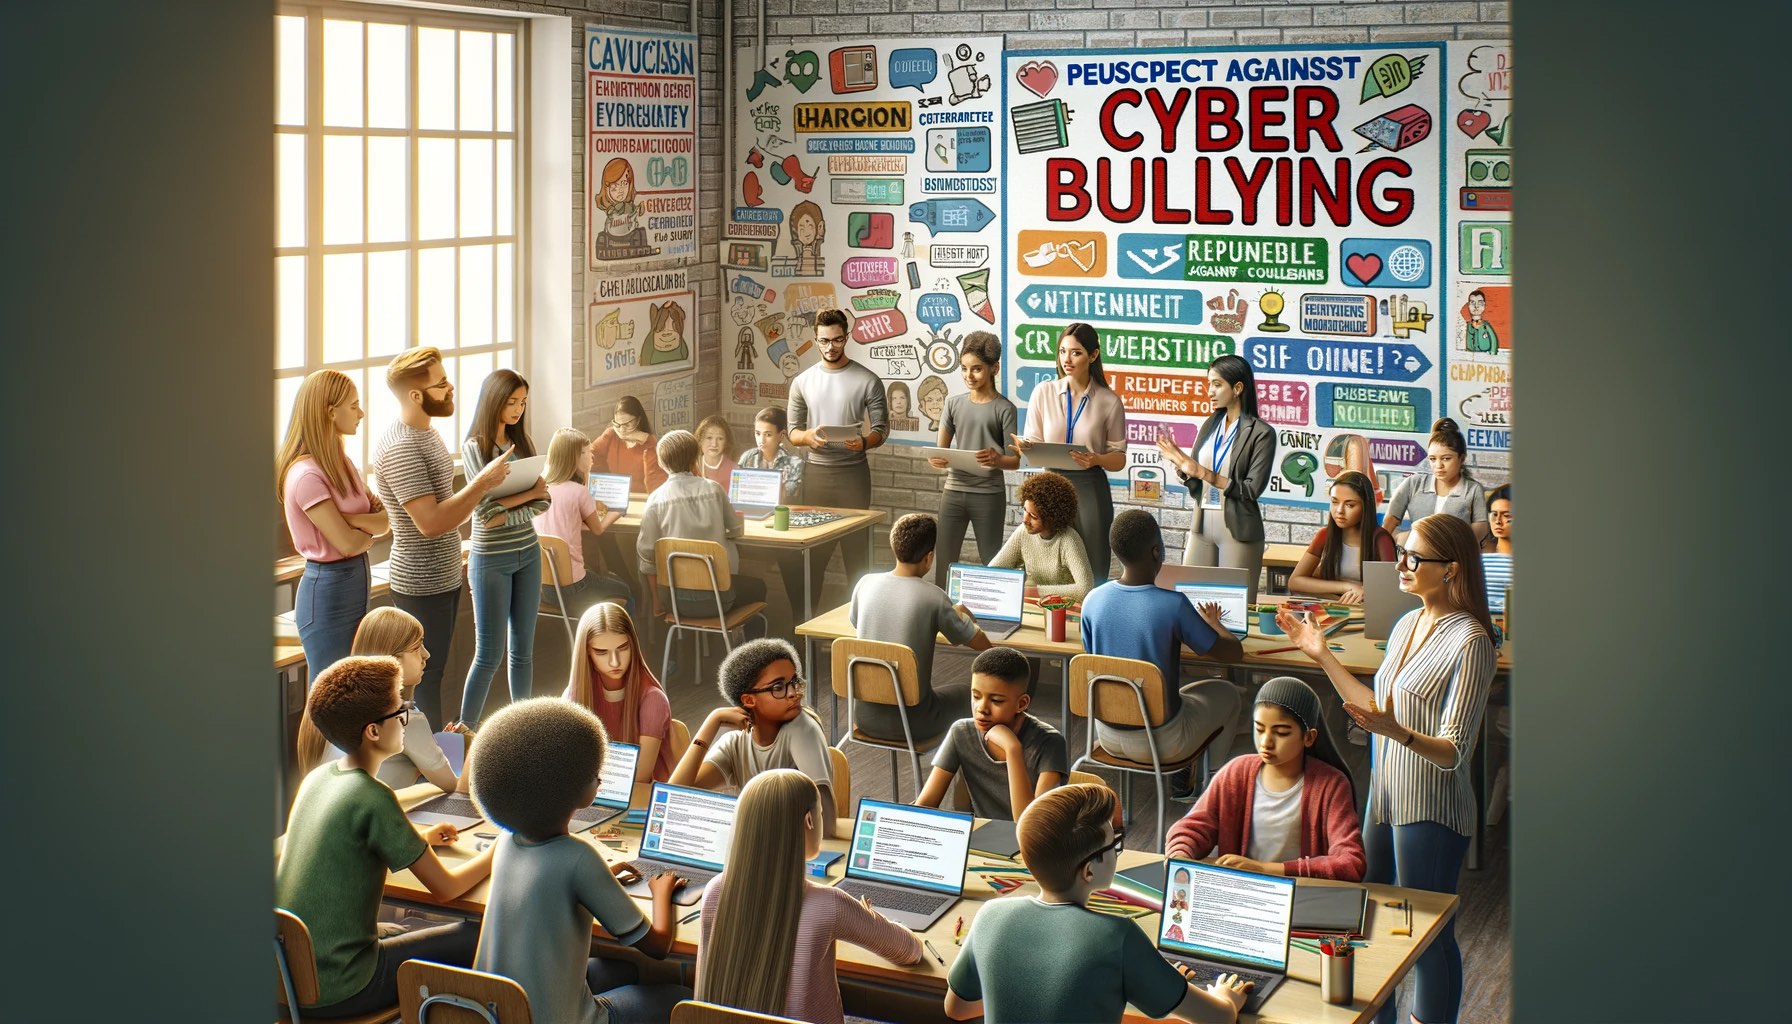 DallE against Cyber-Bullying